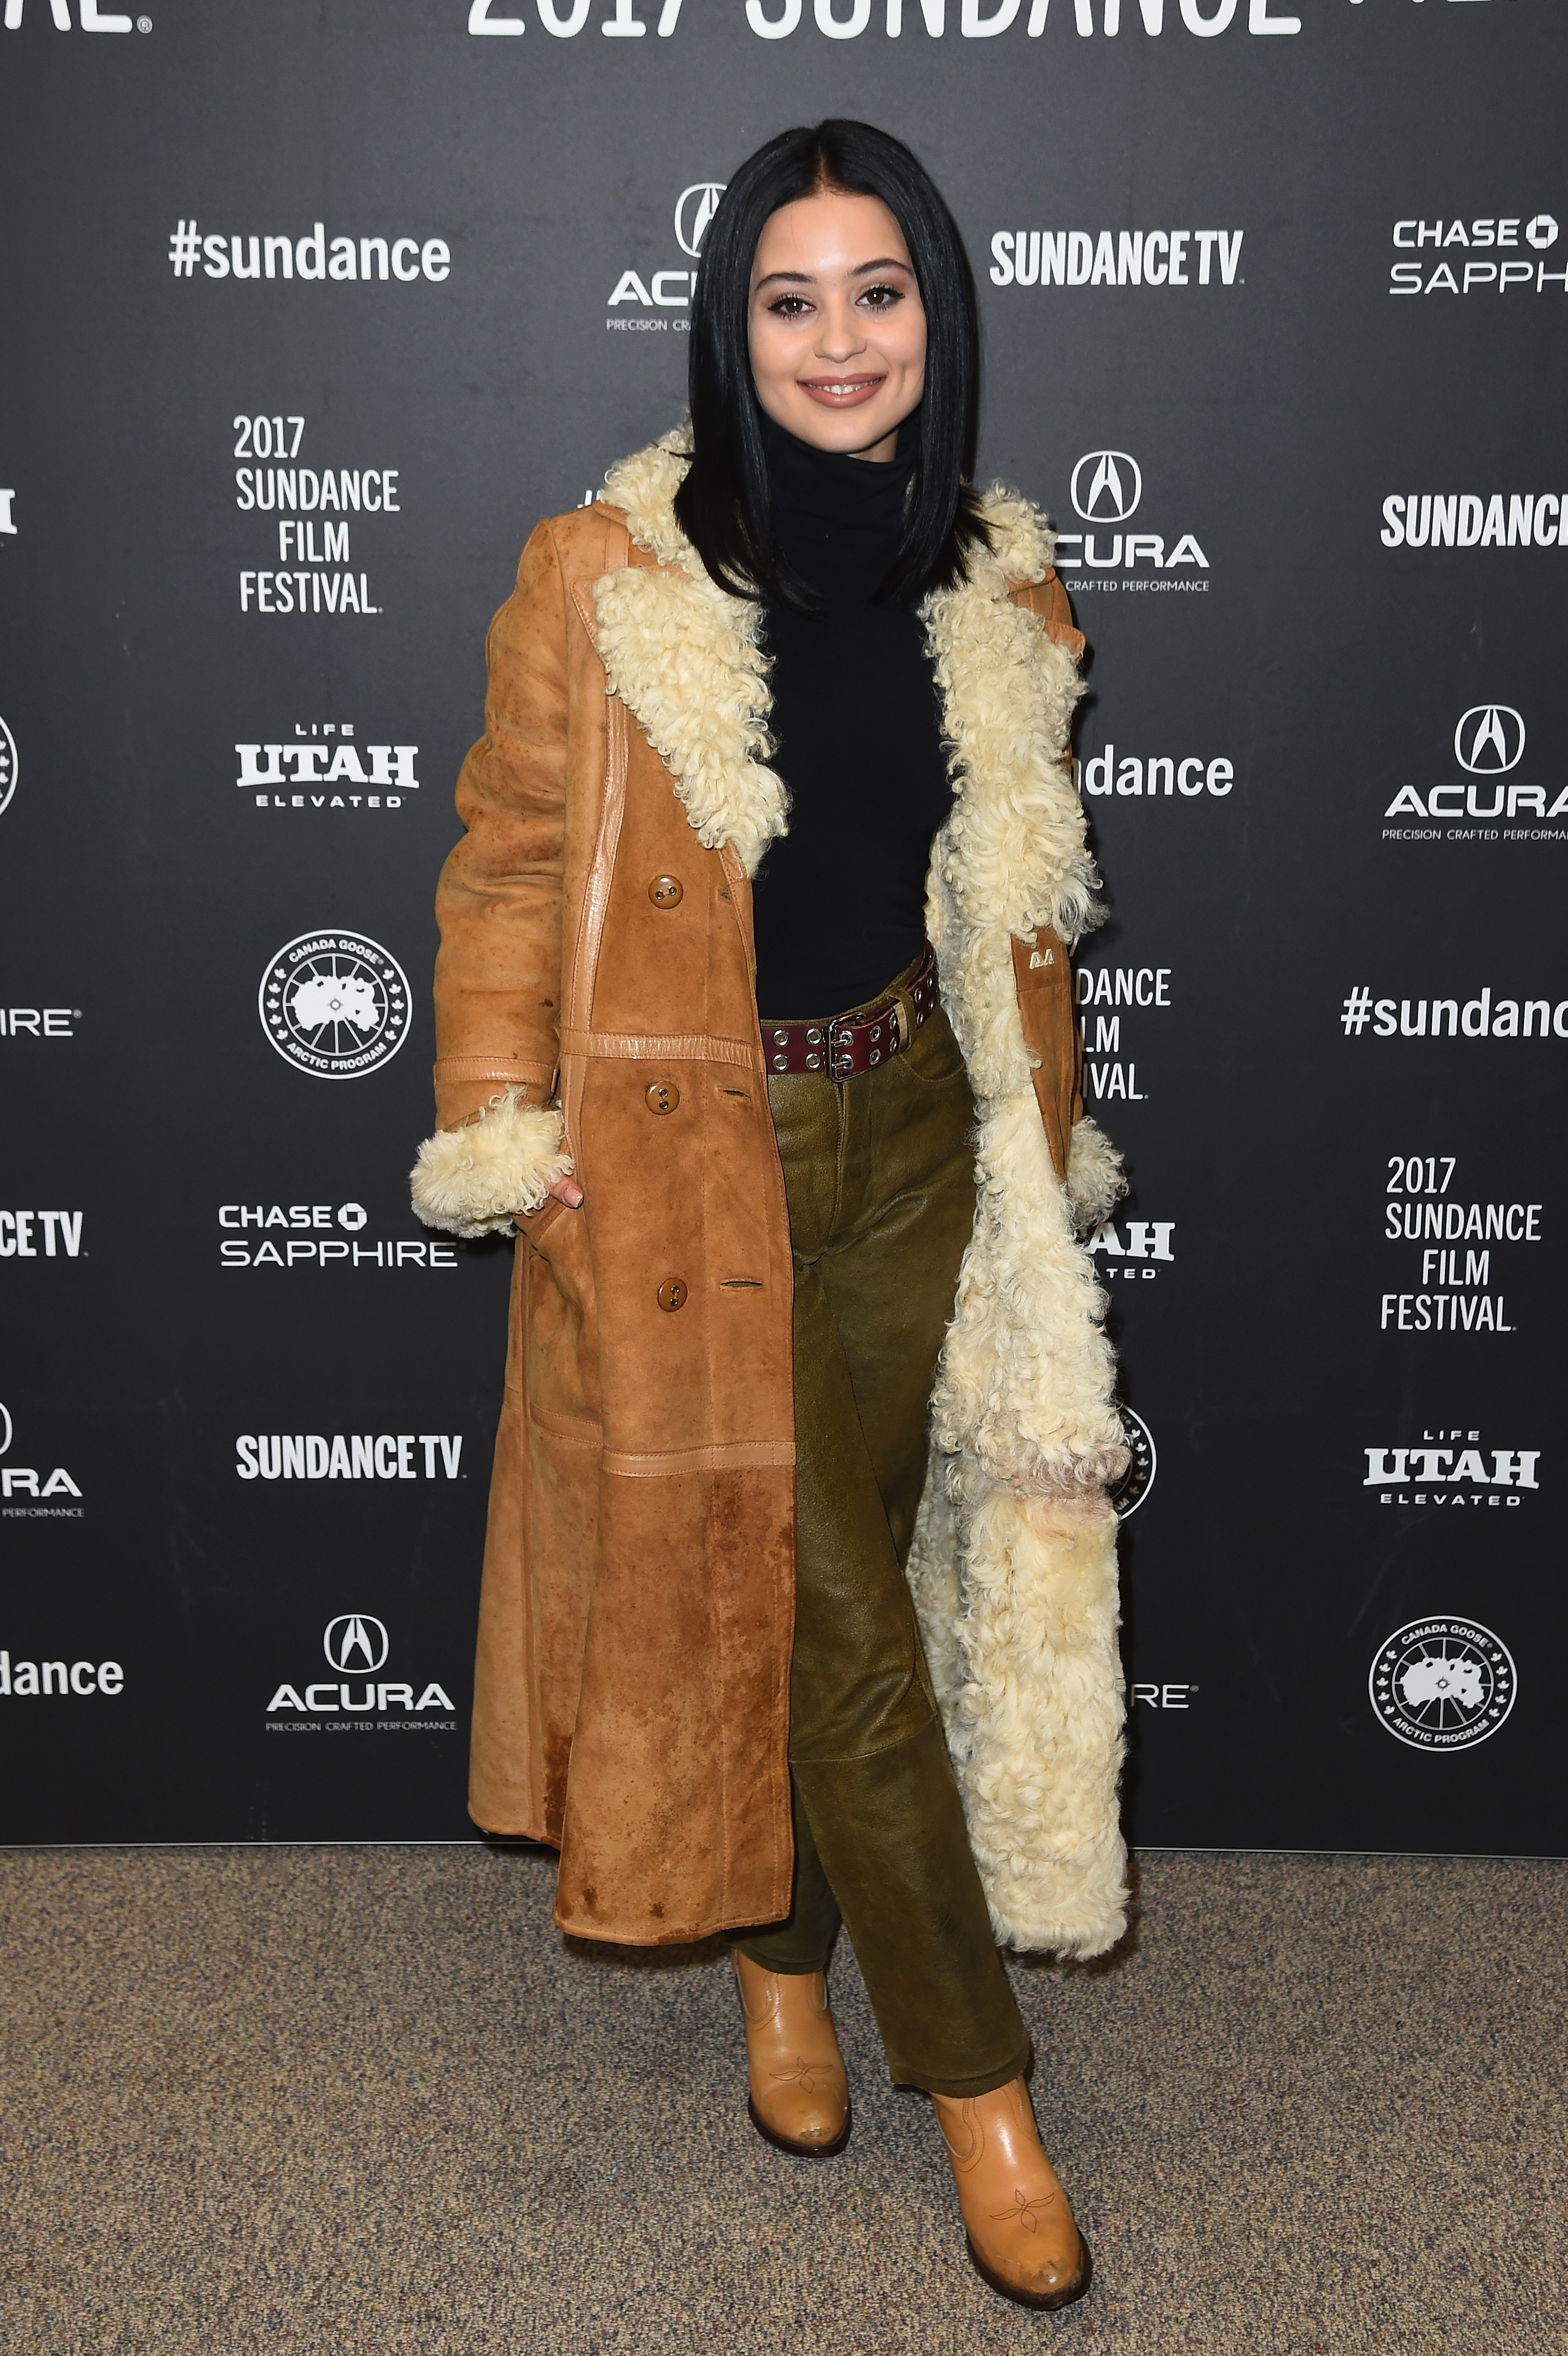 Alexa Demie at Sundance Film Festival 2017 wearing a black turtleneck, leather trousers, a tan coat and tan boots. 